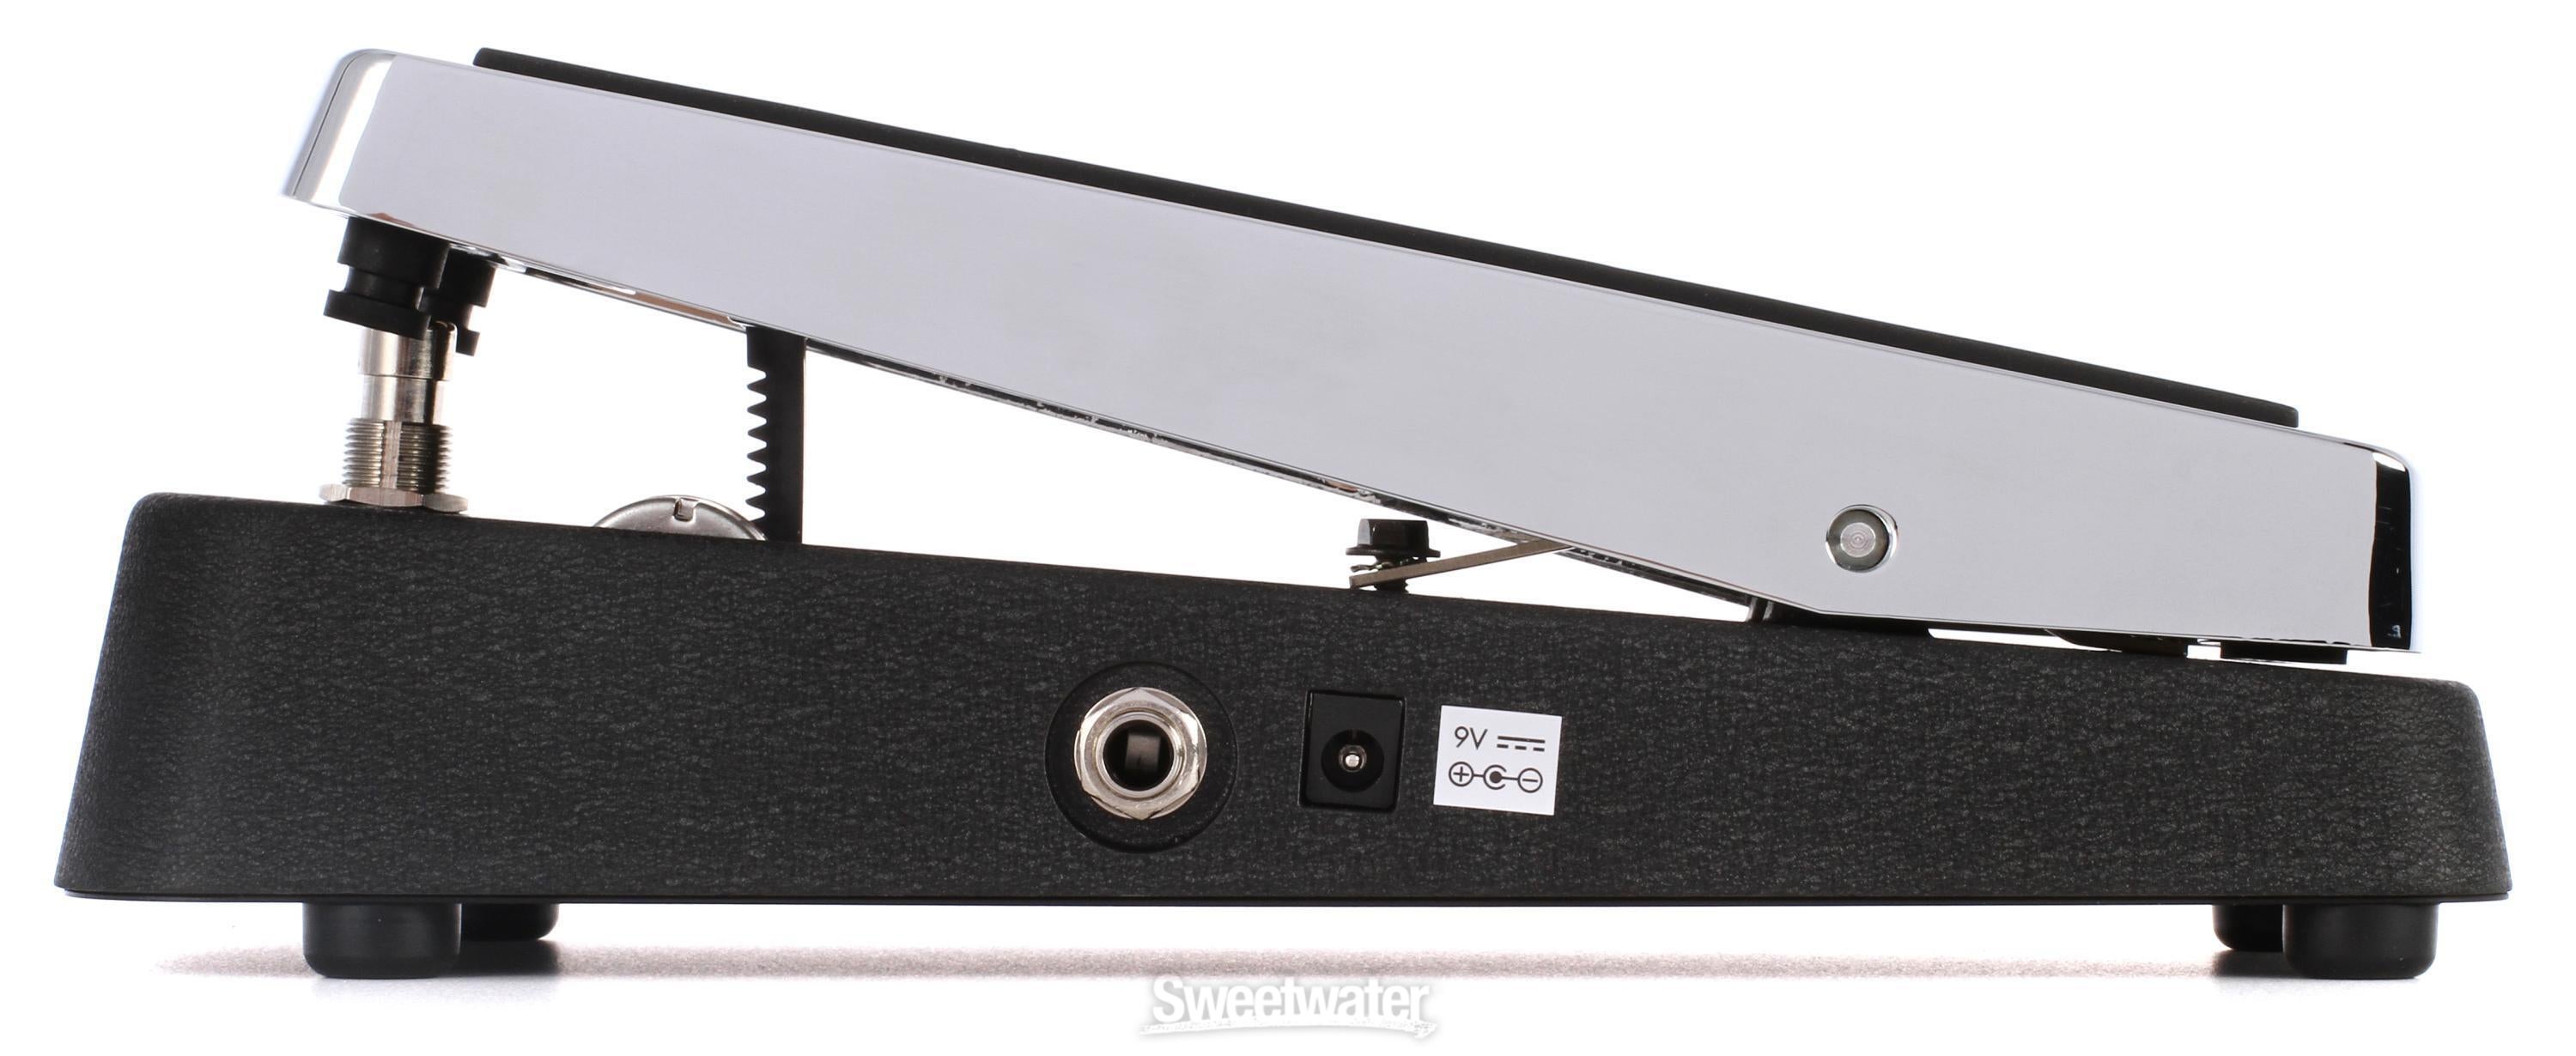 Vox V847-A Classic Reissue Wah Pedal | Sweetwater